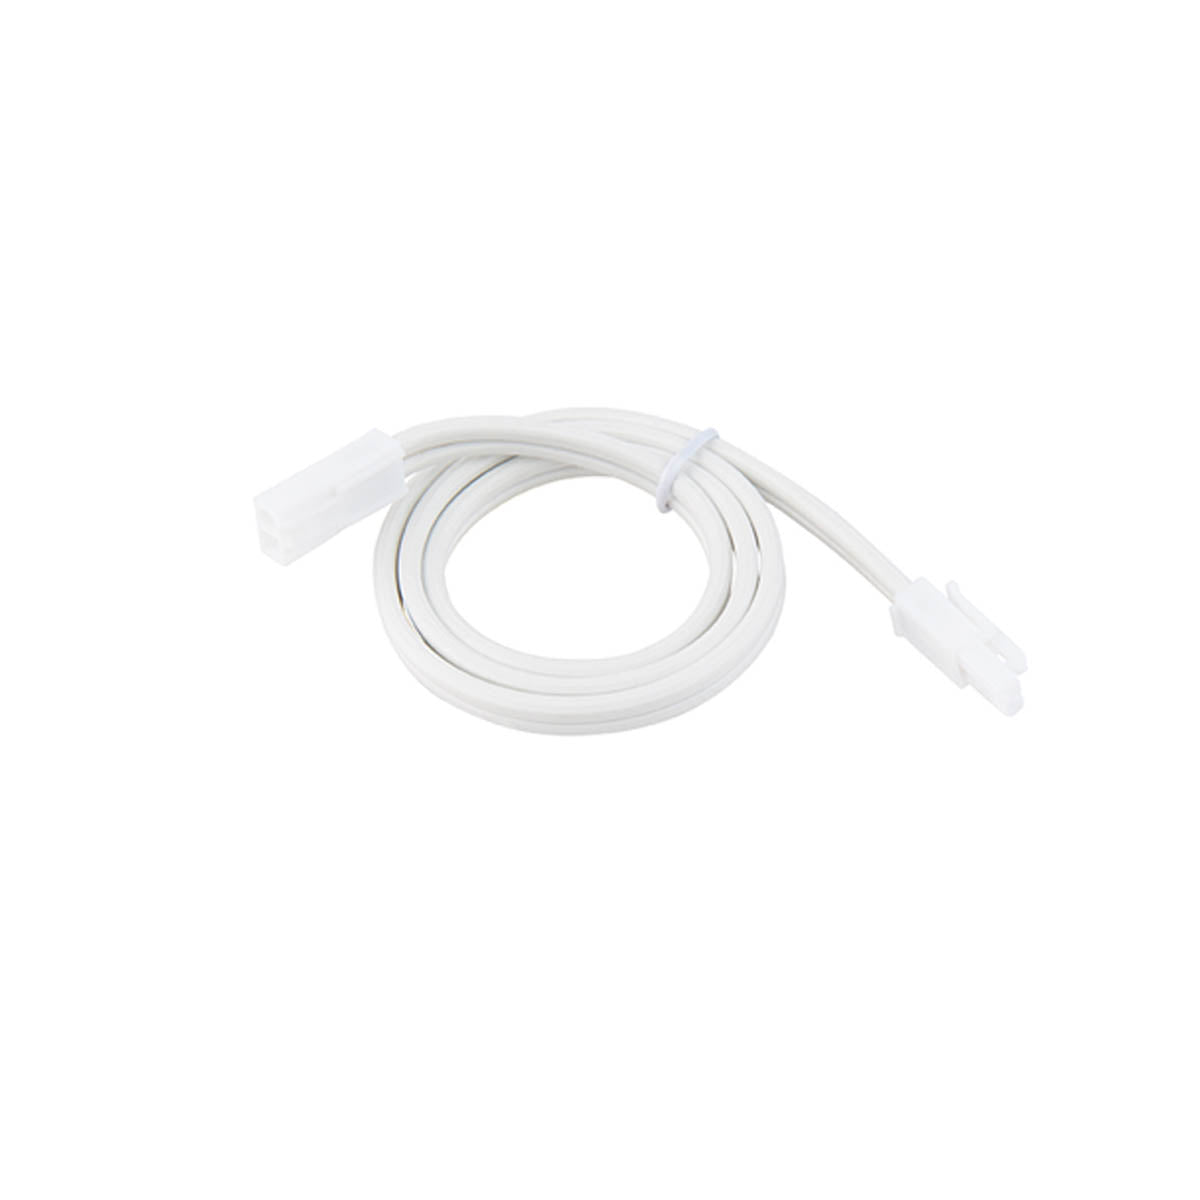 12in. Interconnect Cable for 3-CCT Puck Light, White